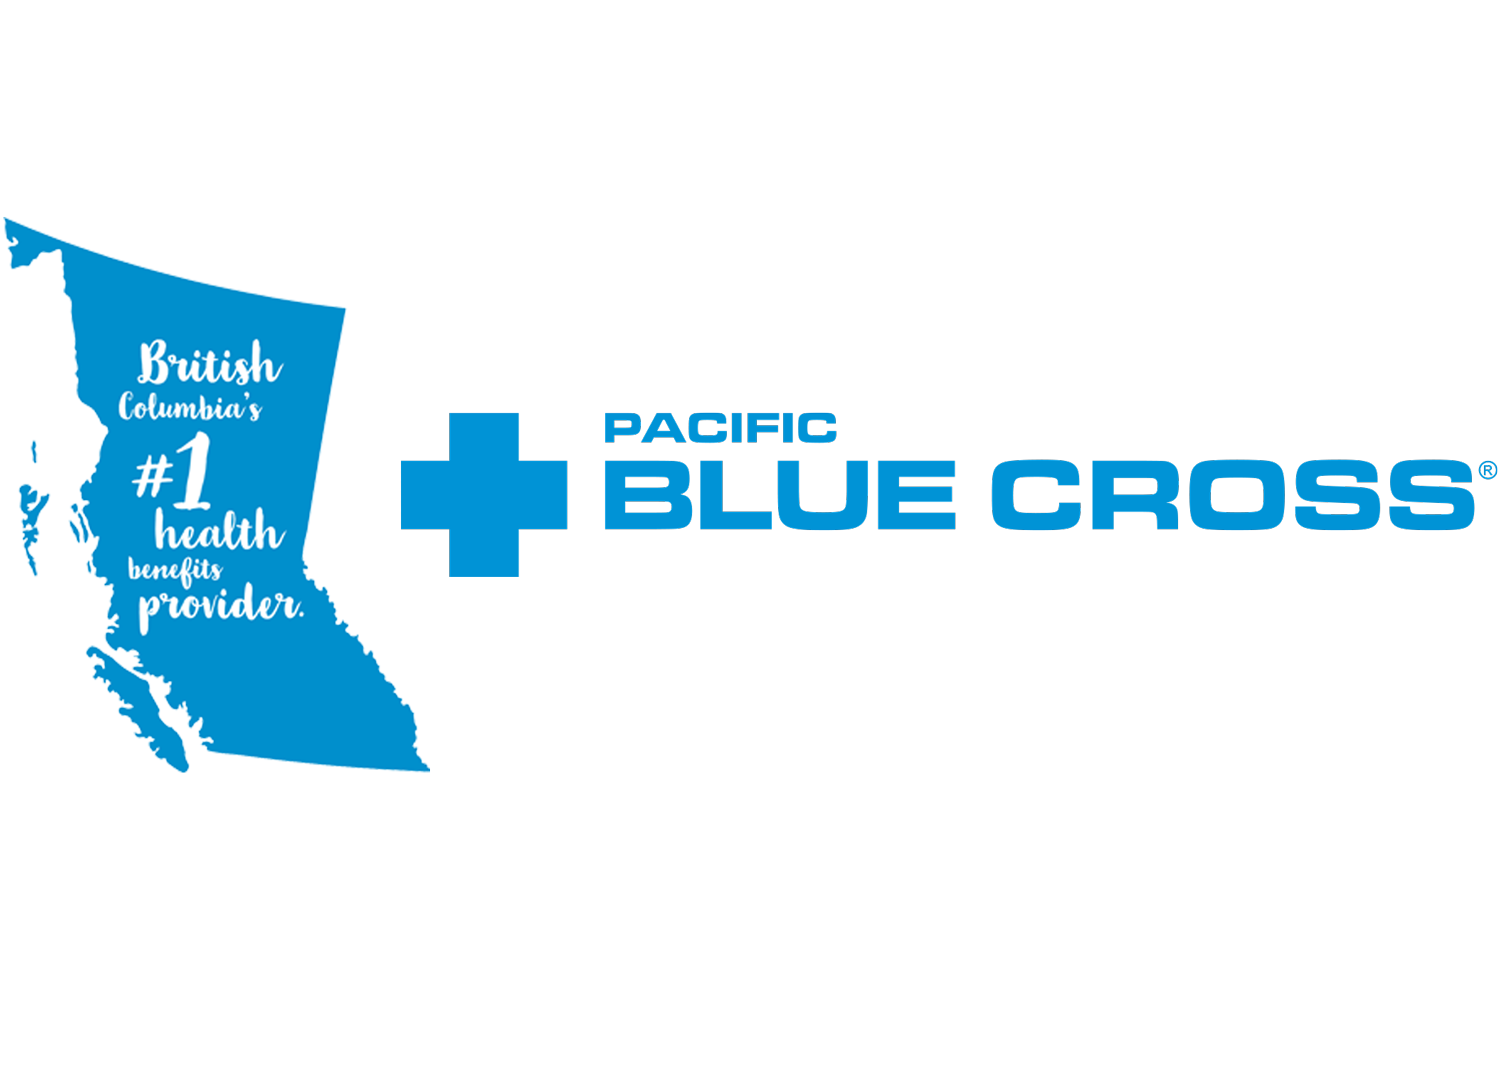 Pacific Blue Cross - BC's #1 provider of health, dental and travel benefits